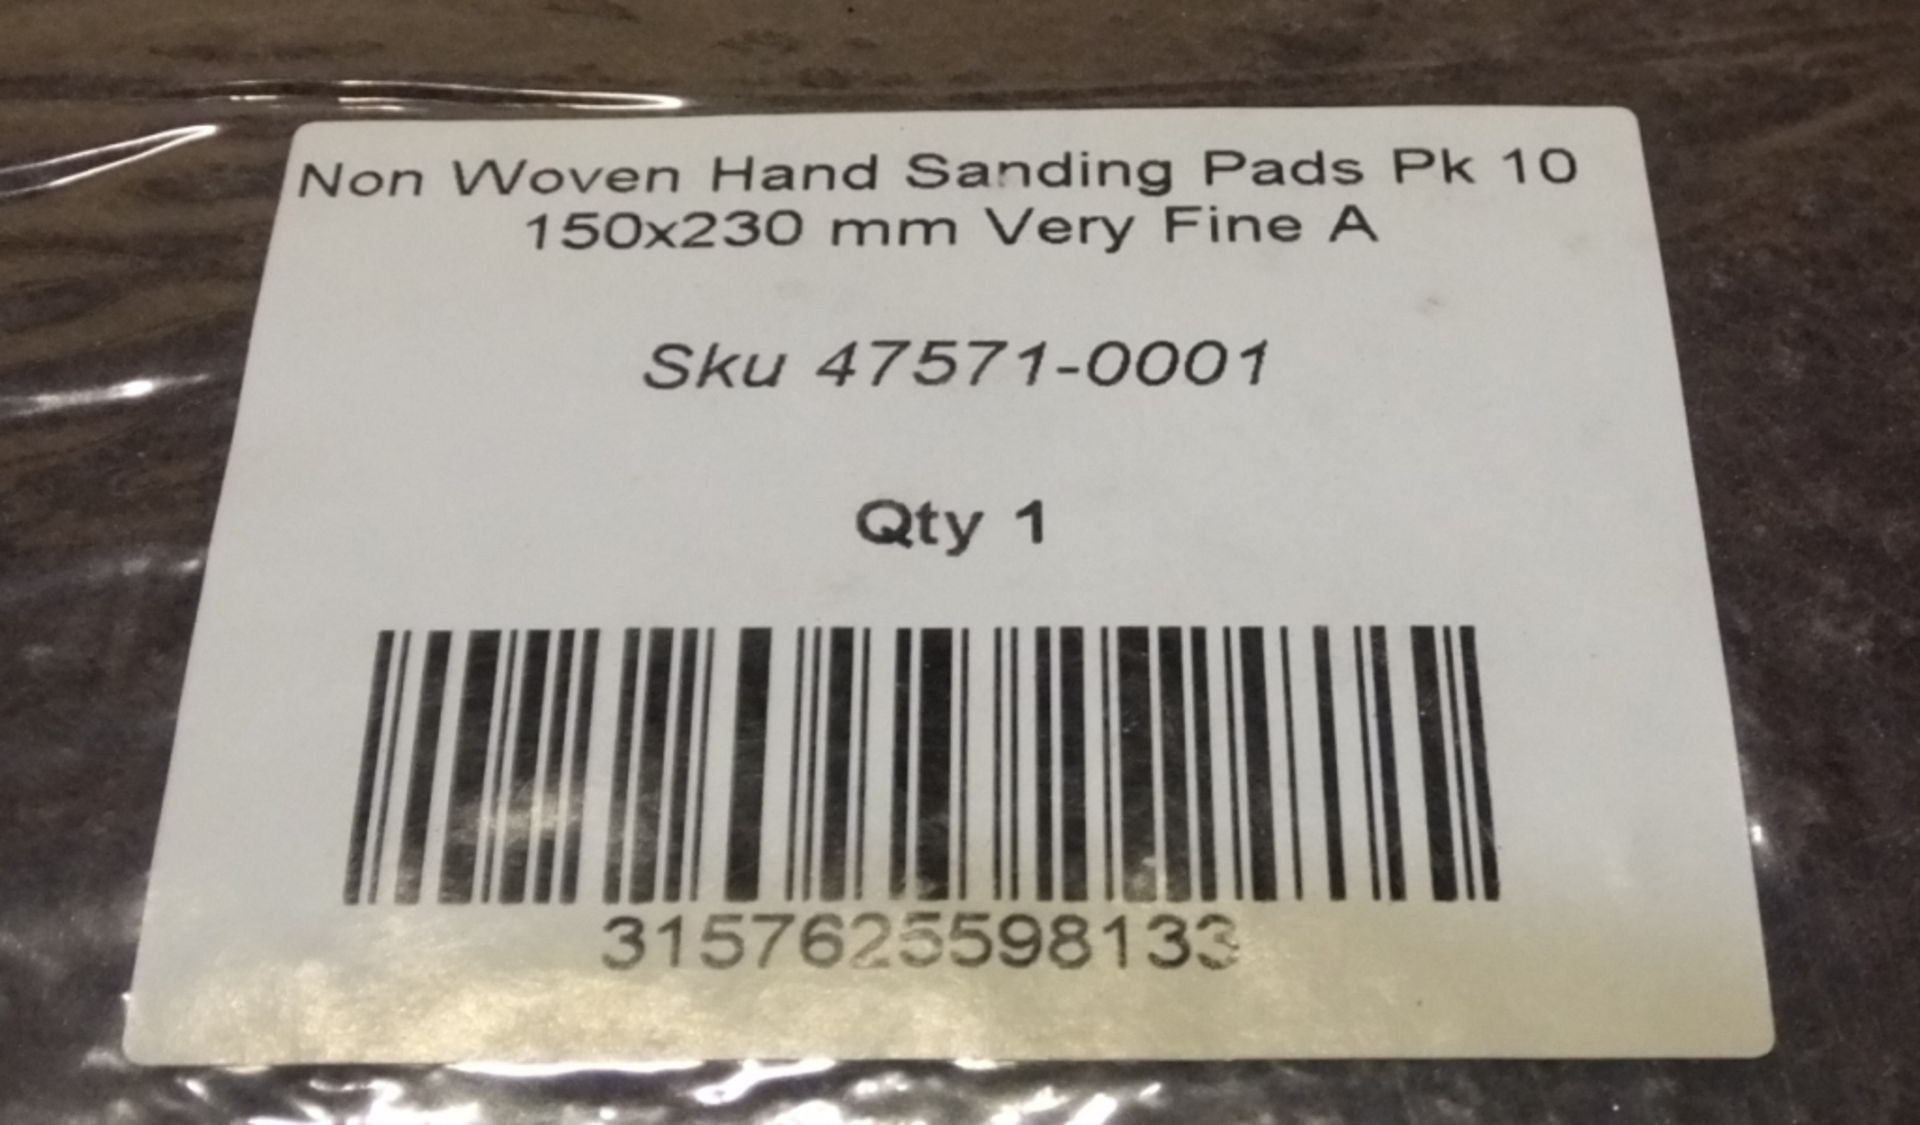 Non Woven Hand Sanding pads - 10 per pack - 20 packs per box - 12 boxes - Image 3 of 3